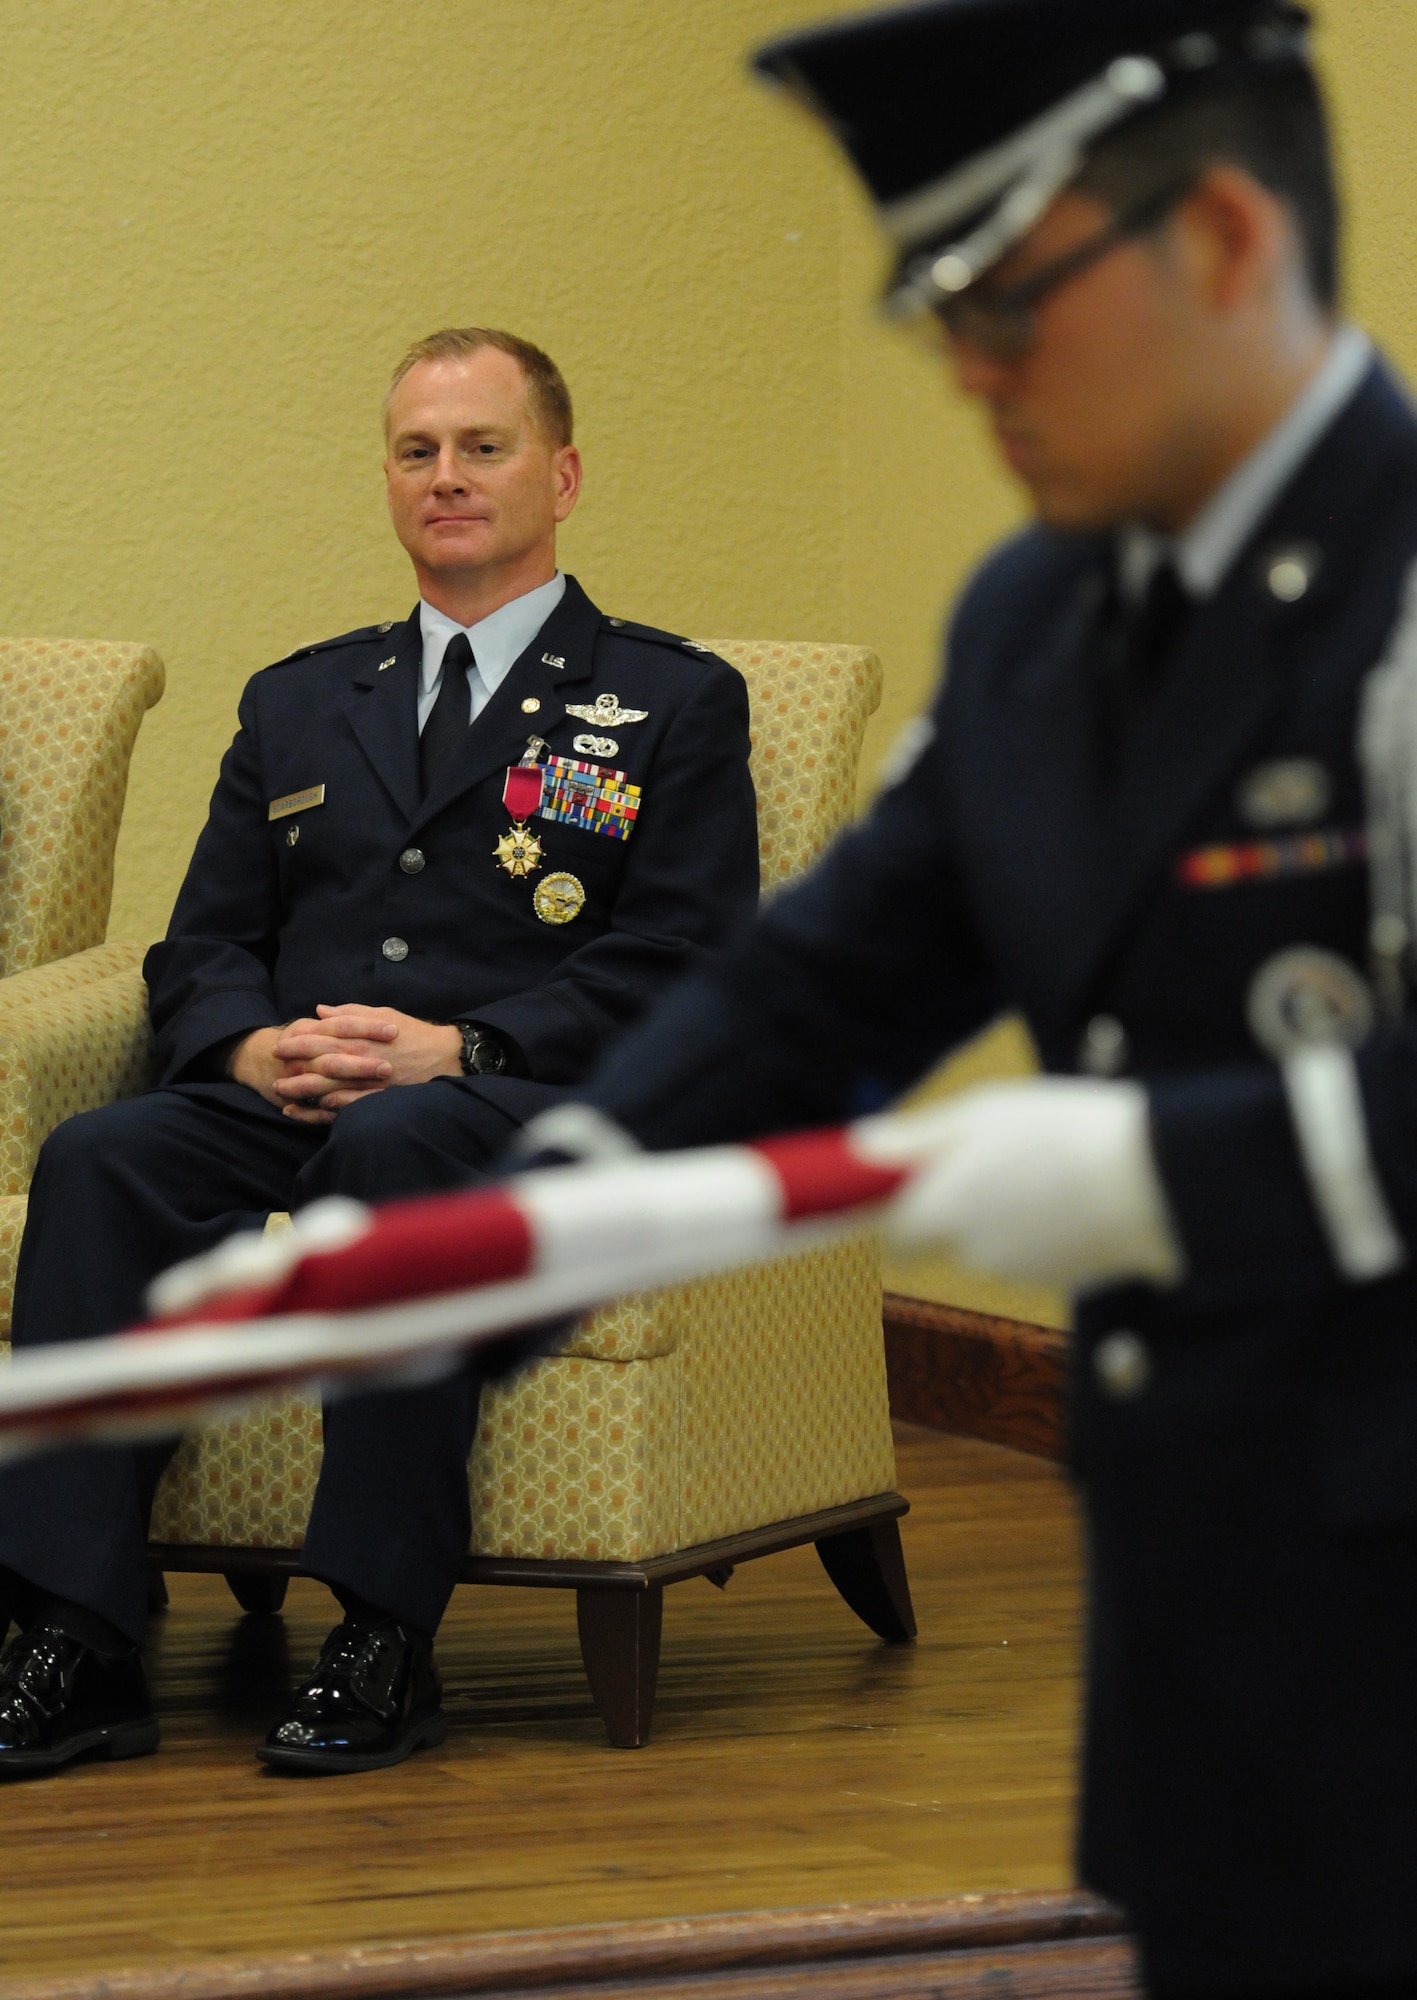 Col. Dennis Scarborough, 81st Training Wing vice commander, watches as the Keesler Honor Guard folds the U.S. flag during his retirement ceremony at the Bay Breeze Event Center June 28, 2016, on Keesler Air Force Base, Miss. Scarborough retired with 27 years of military service. He has served multiple tours as an F-15C instructor and evaluator and has held positions in the fields of defense policy, operational plans, safety and aircraft maintenance. He has commanded at the squadron level and served as an operations group deputy commander. (U.S. Air Force photo by Kemberly Groue/Released)